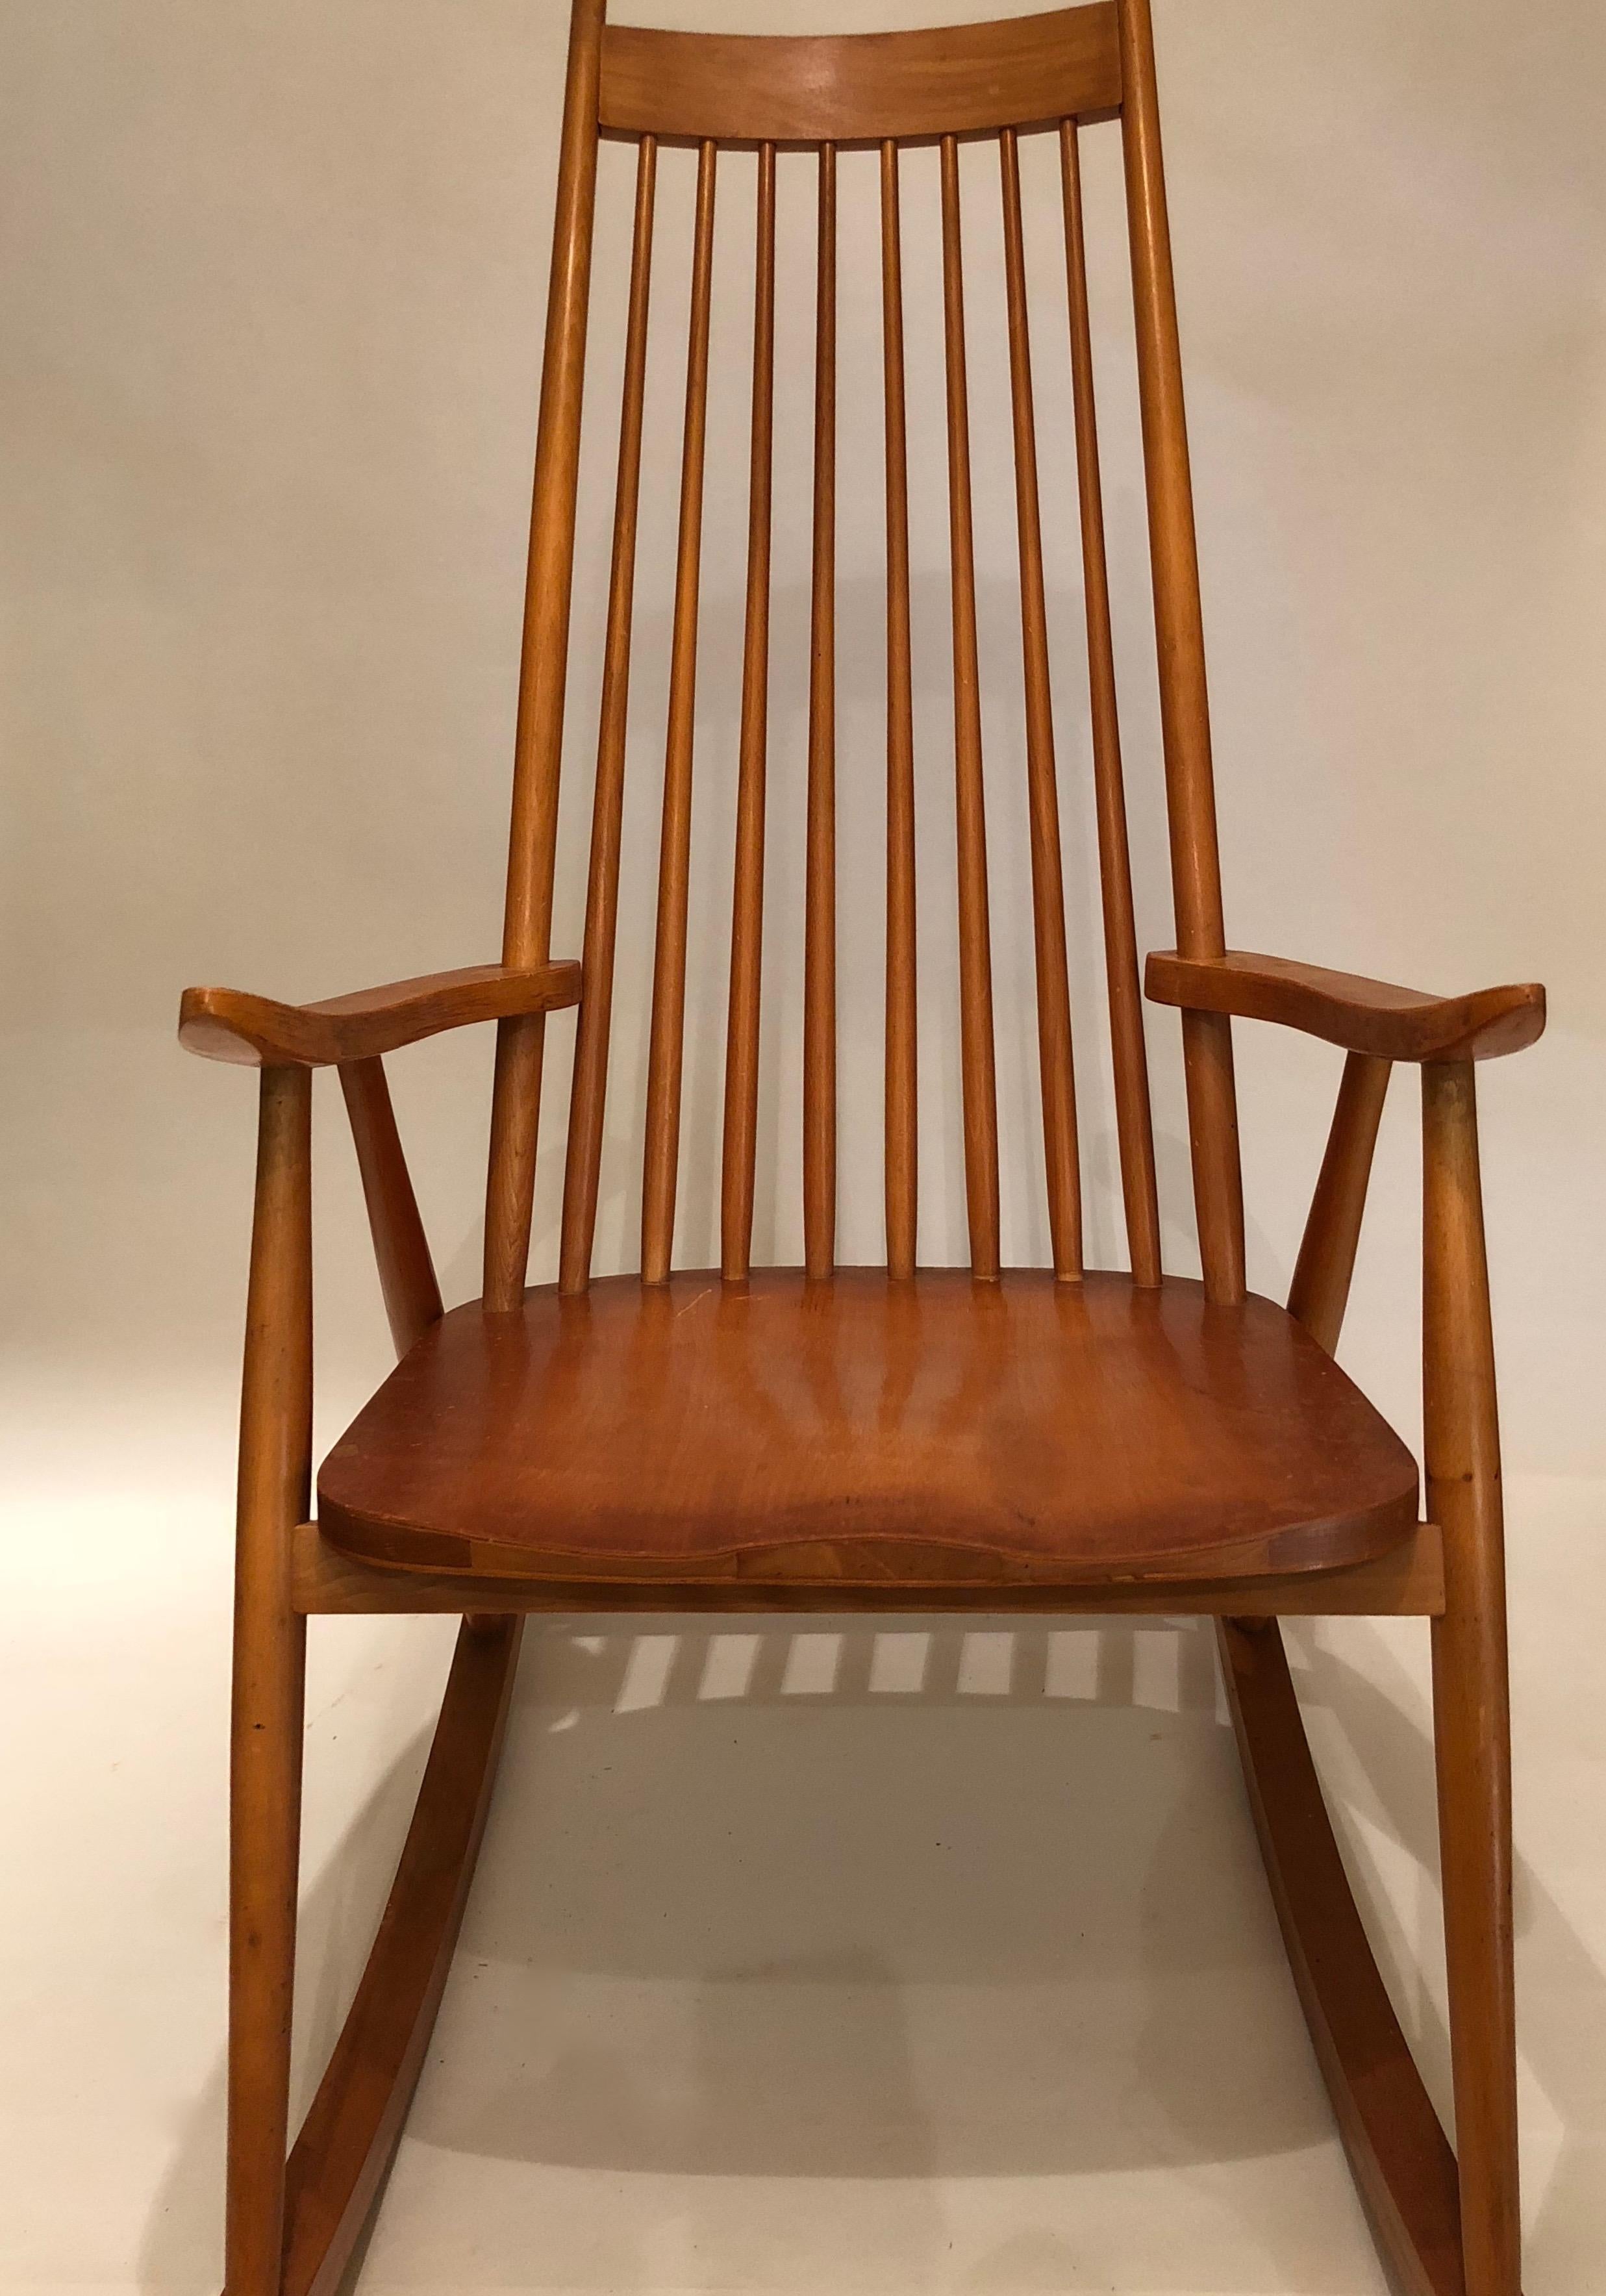 Rocking chair in beachwood made in Czechoslovakia in early 1950s.
Simple design inspired from Shaker and Scandinavian design.
With original patina.